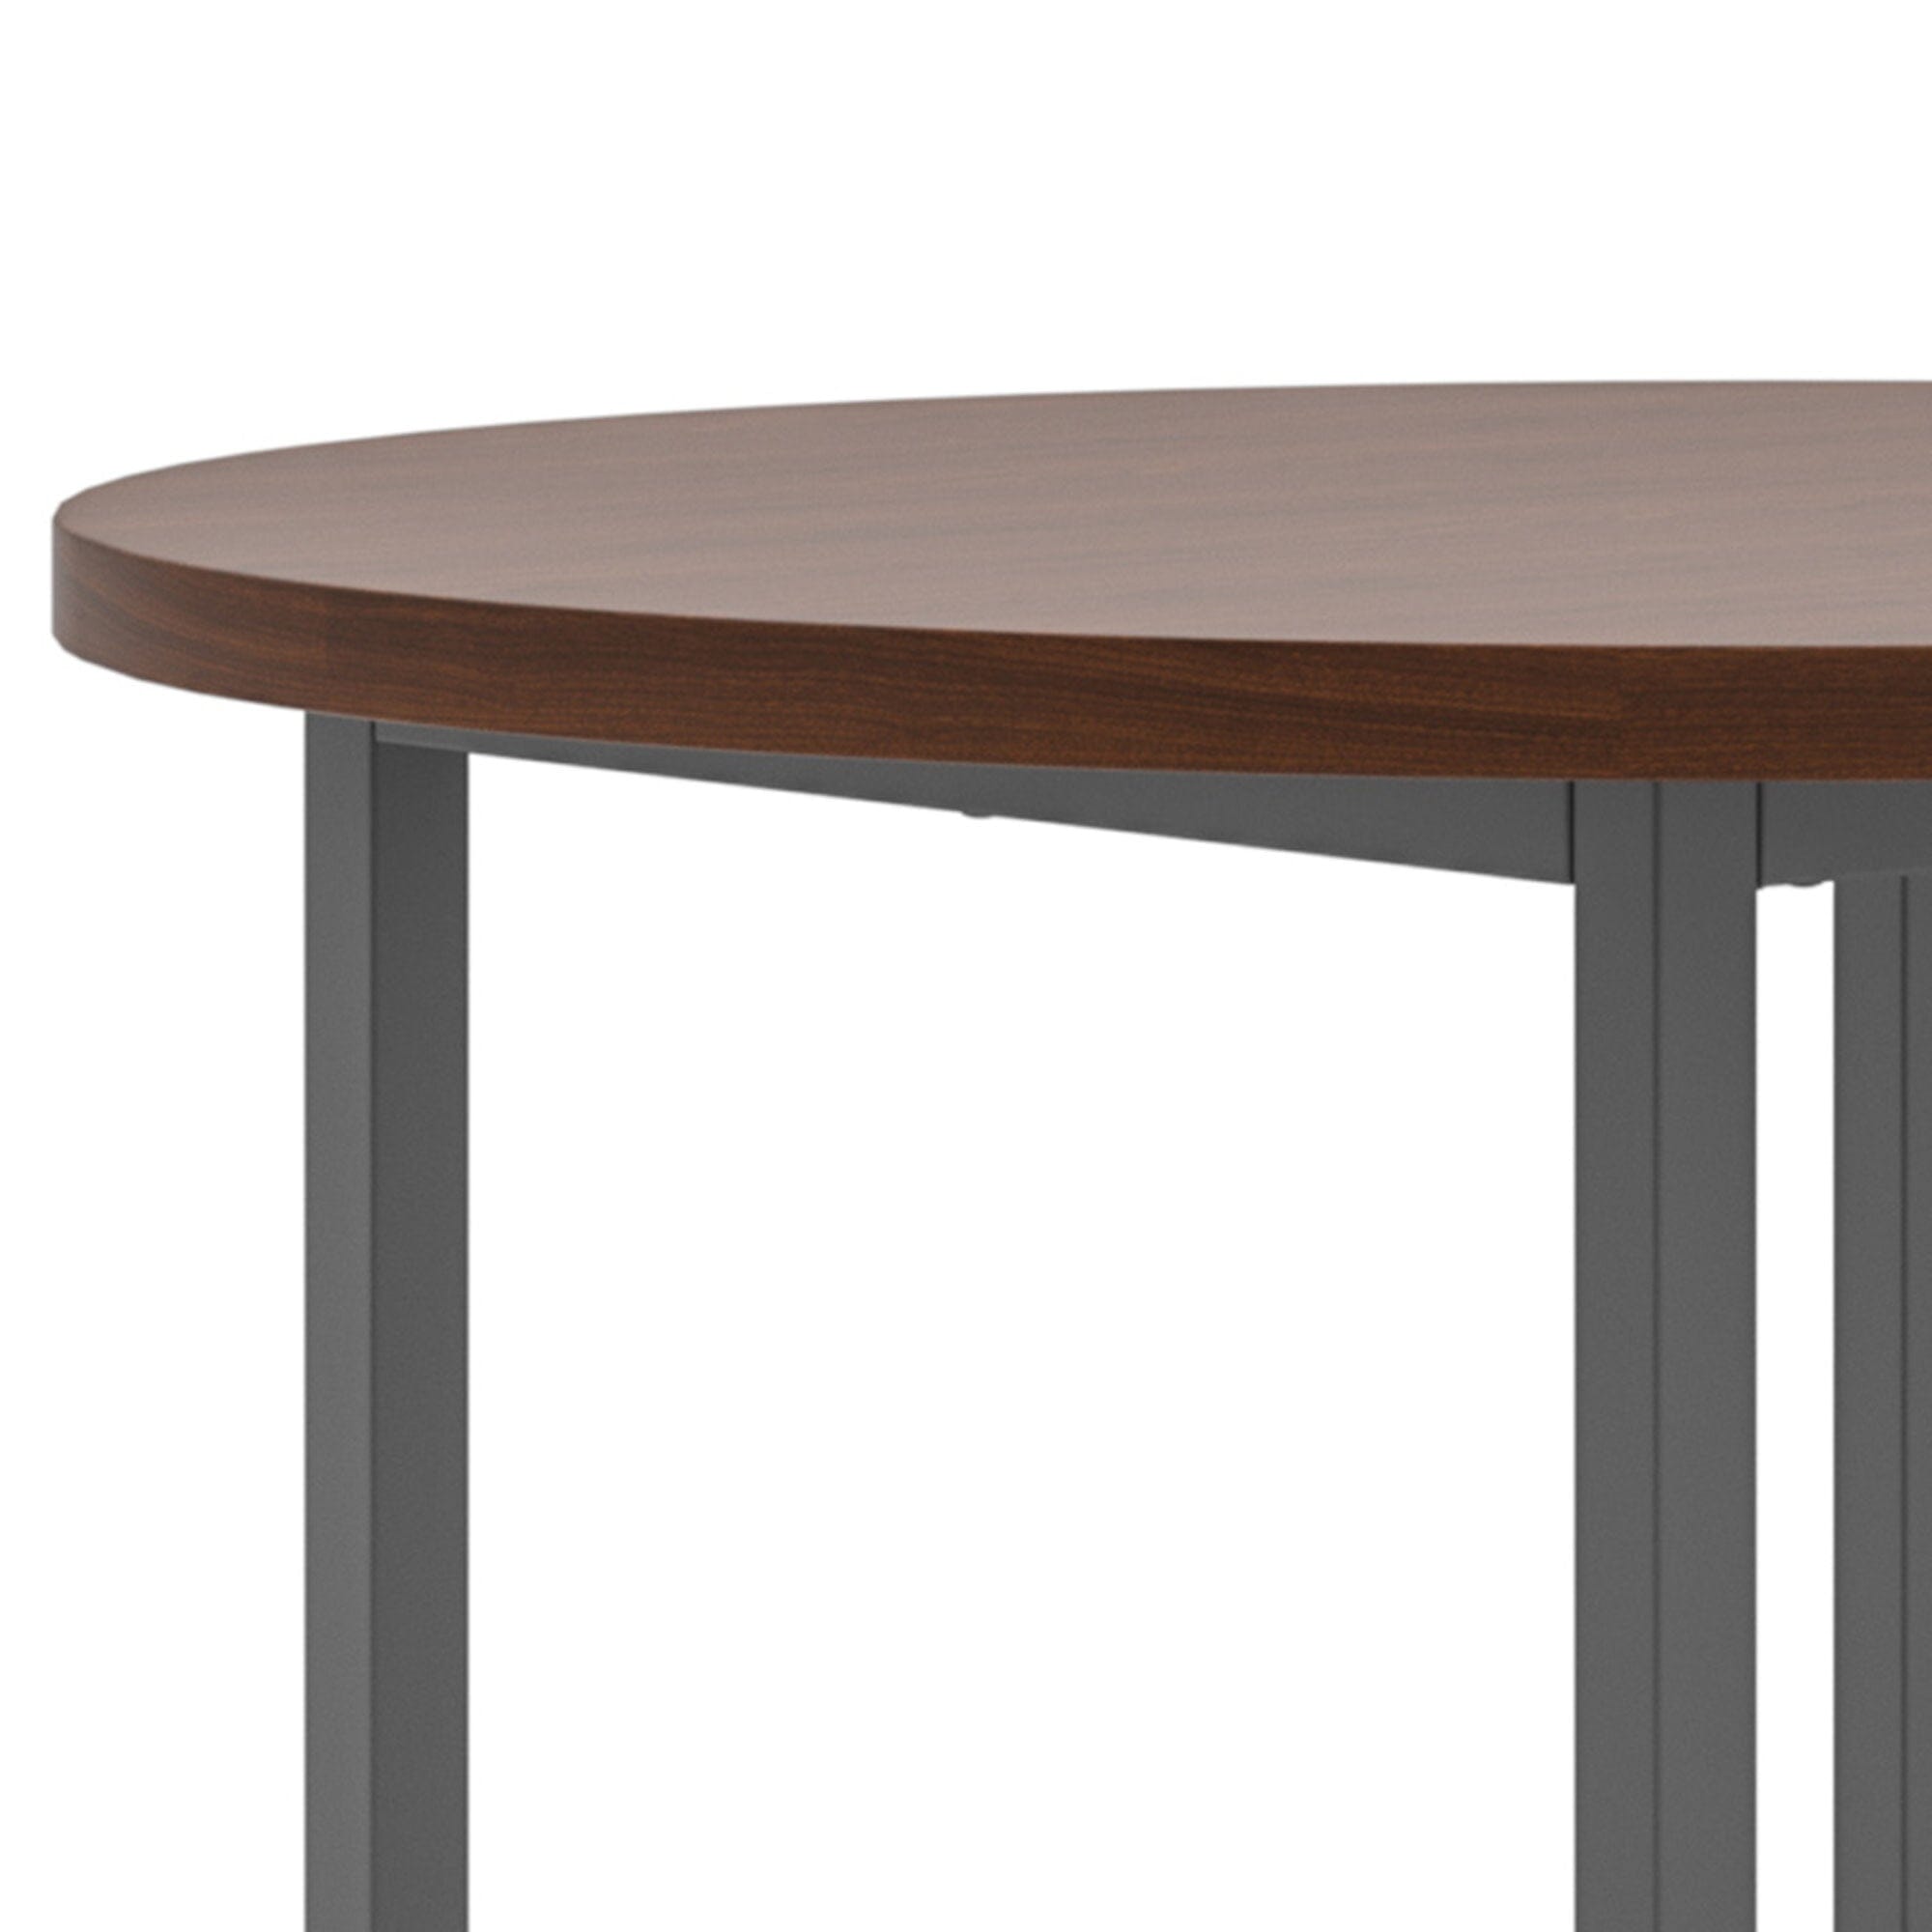 Modern & Contemporary Dining Table By Merge Dining Table Merge